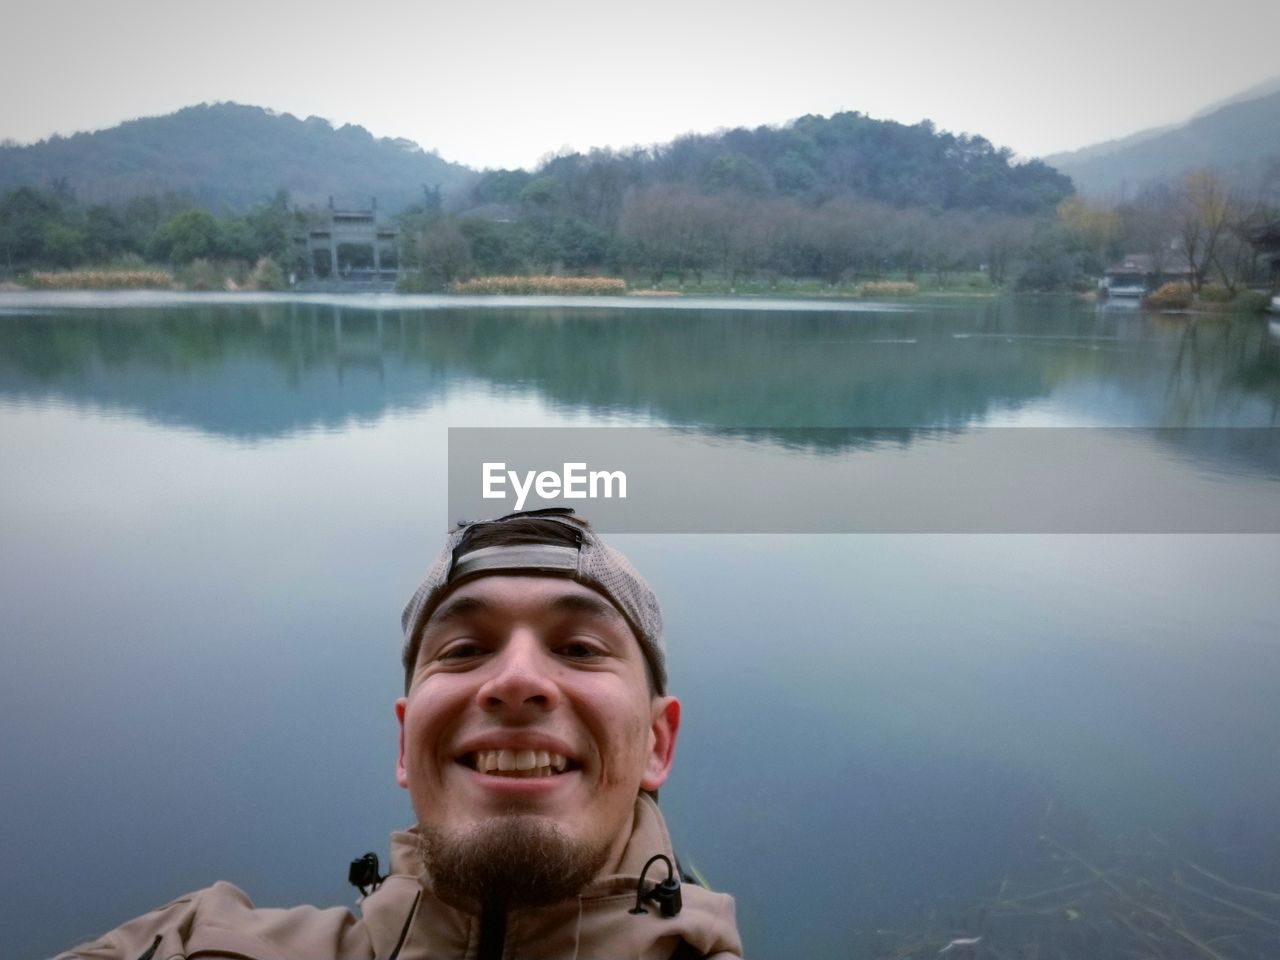 Portrait of smiling young man by lake against mountains